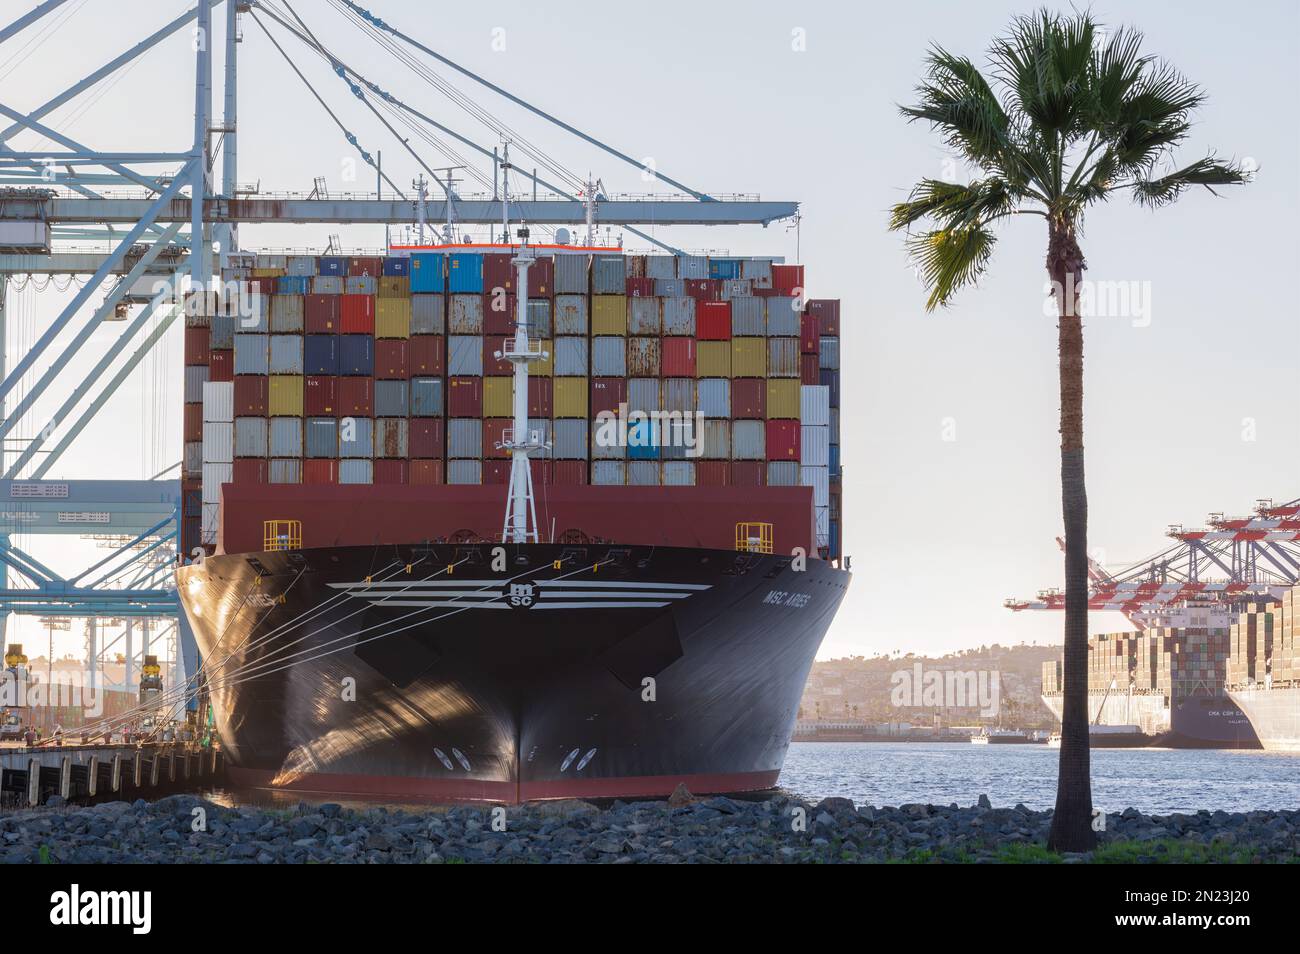 Port of Los Angeles, California, United States - December 26, 2021: container ship MSC Aries shown docked at at APM Terminals. Stock Photo